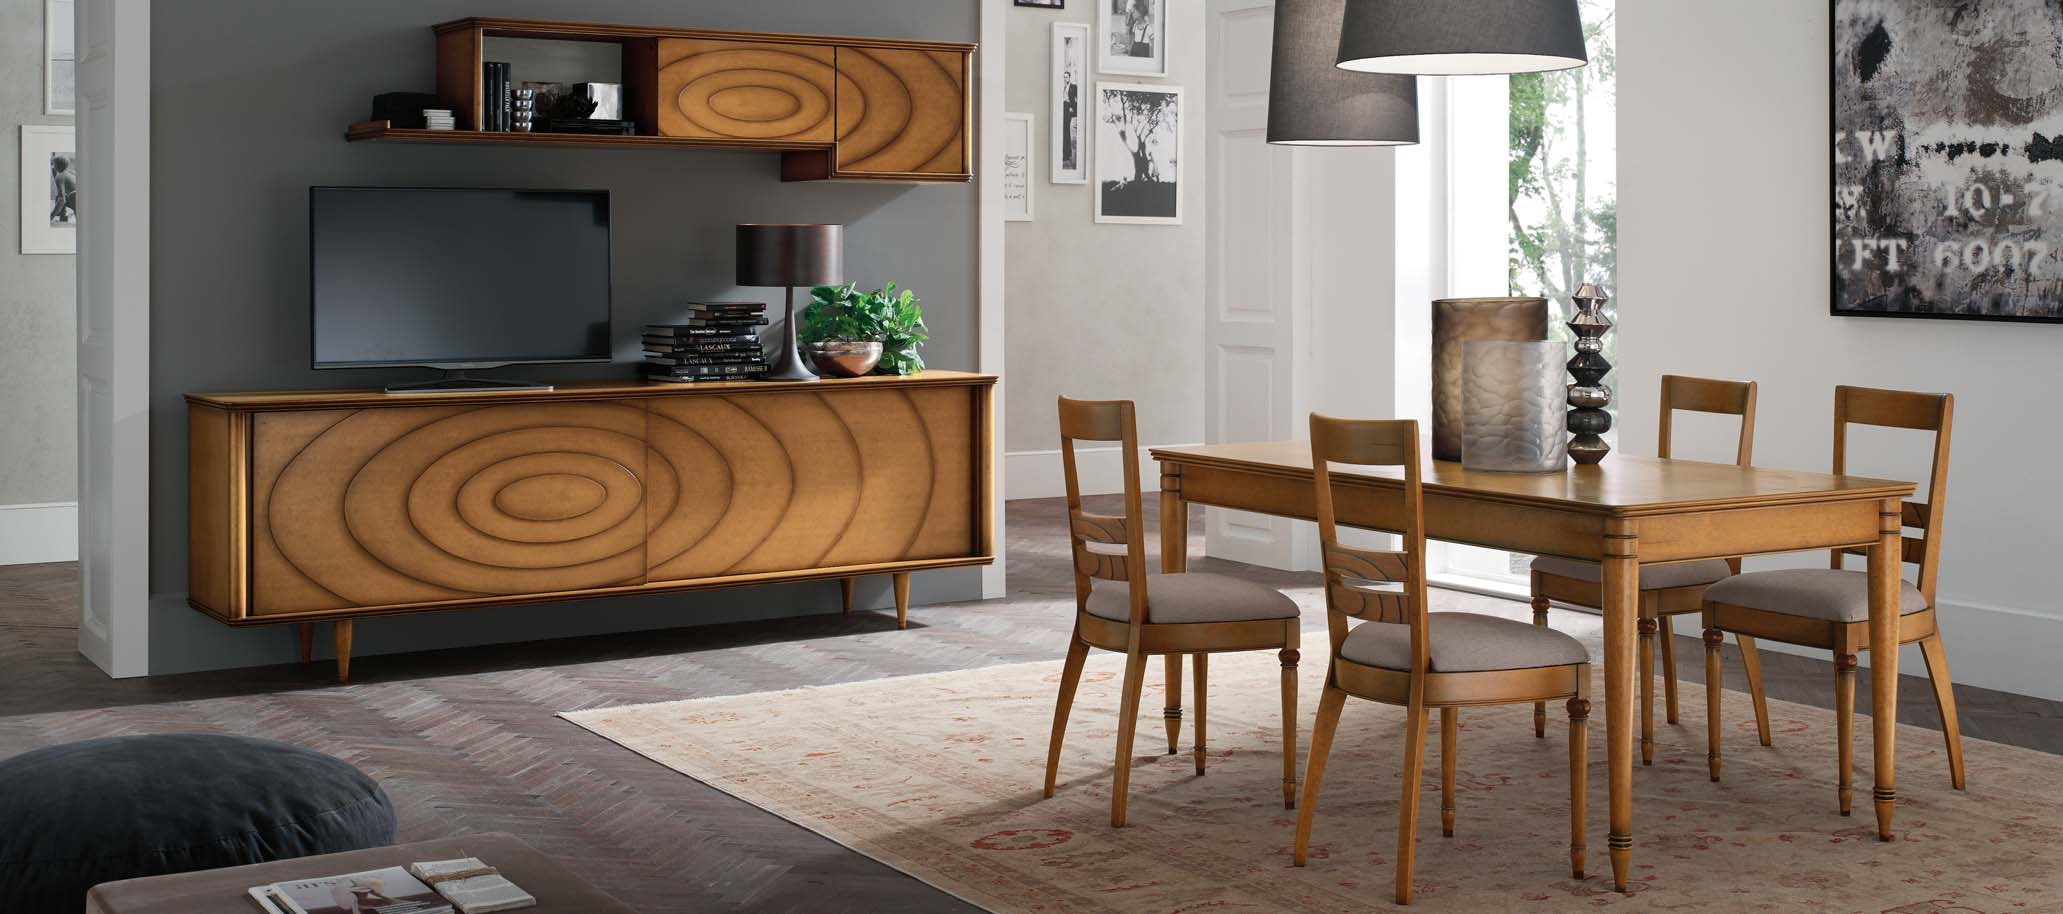 N 1 Collection N1P1 PENSILE CON ANTA BATTENTE E ANTA SCORREVOLE / WALL UNIT WITH WITH TWO DOORS. FINITURA / FINISH: CACAO. N126 CREDENZA CON DUE ANTE SCORREVOLI / DRESSER WITH TWO SLIDING DOORS.